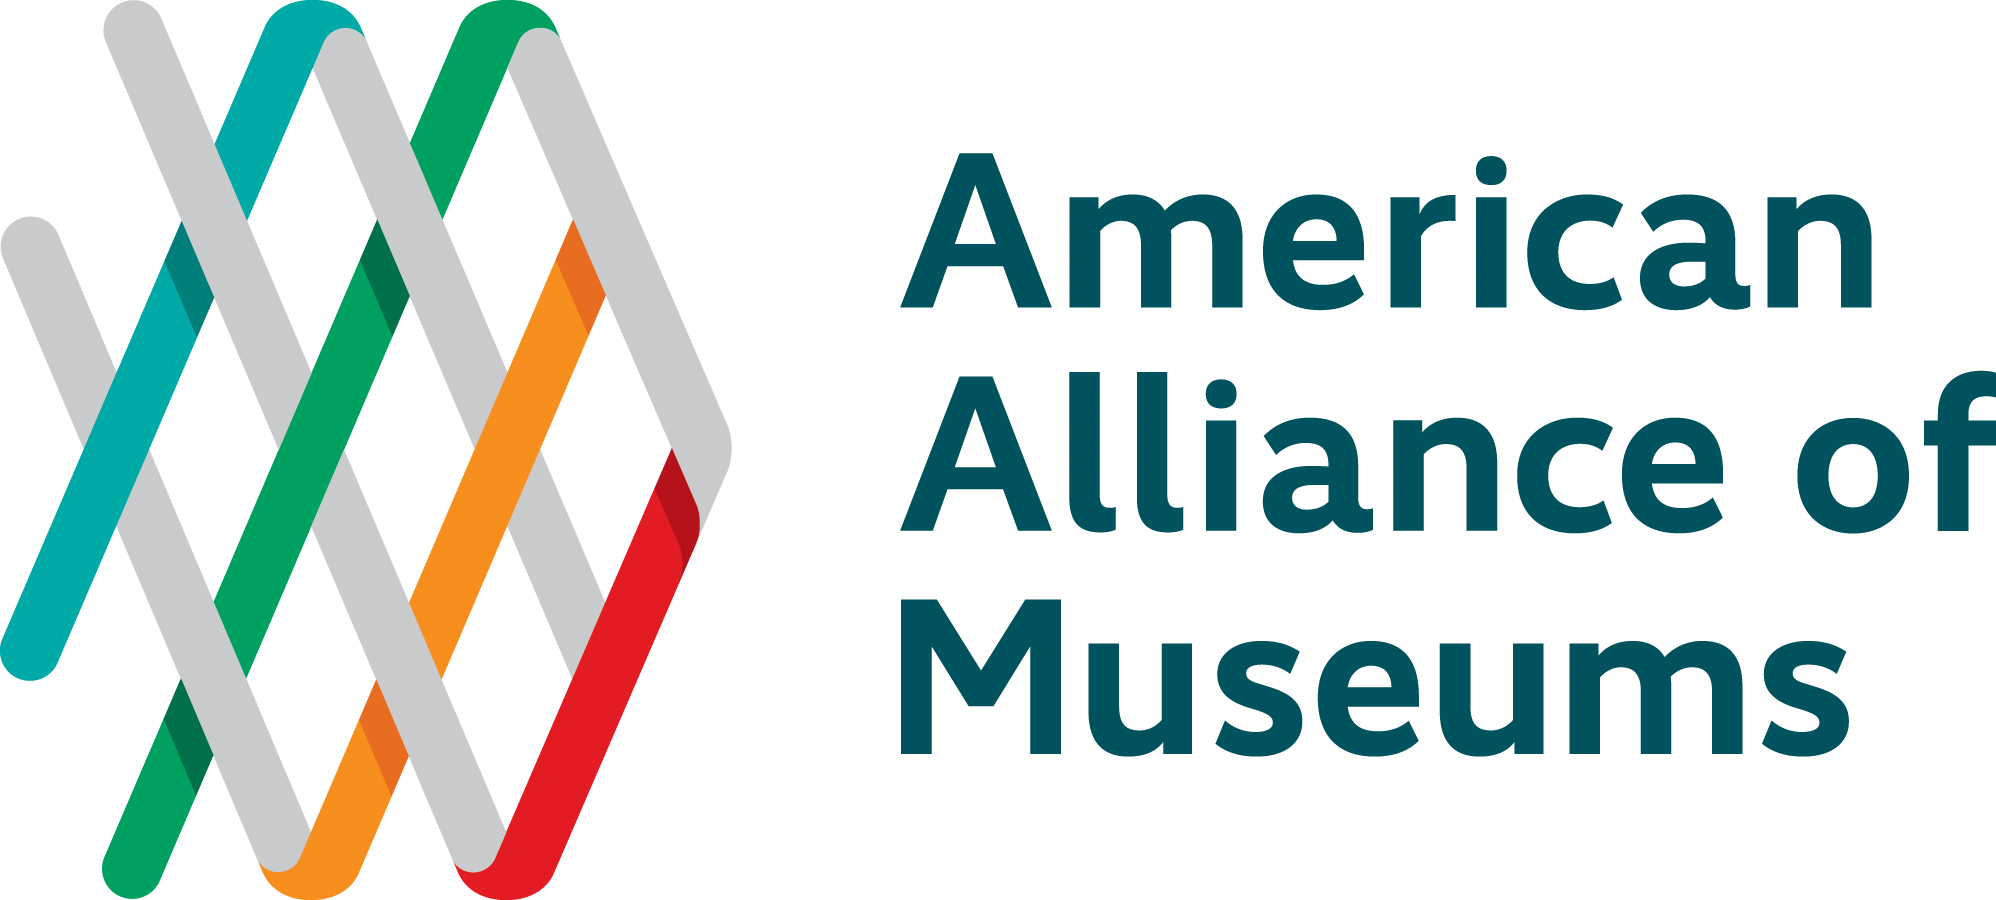 American Alliance of Museums Logo